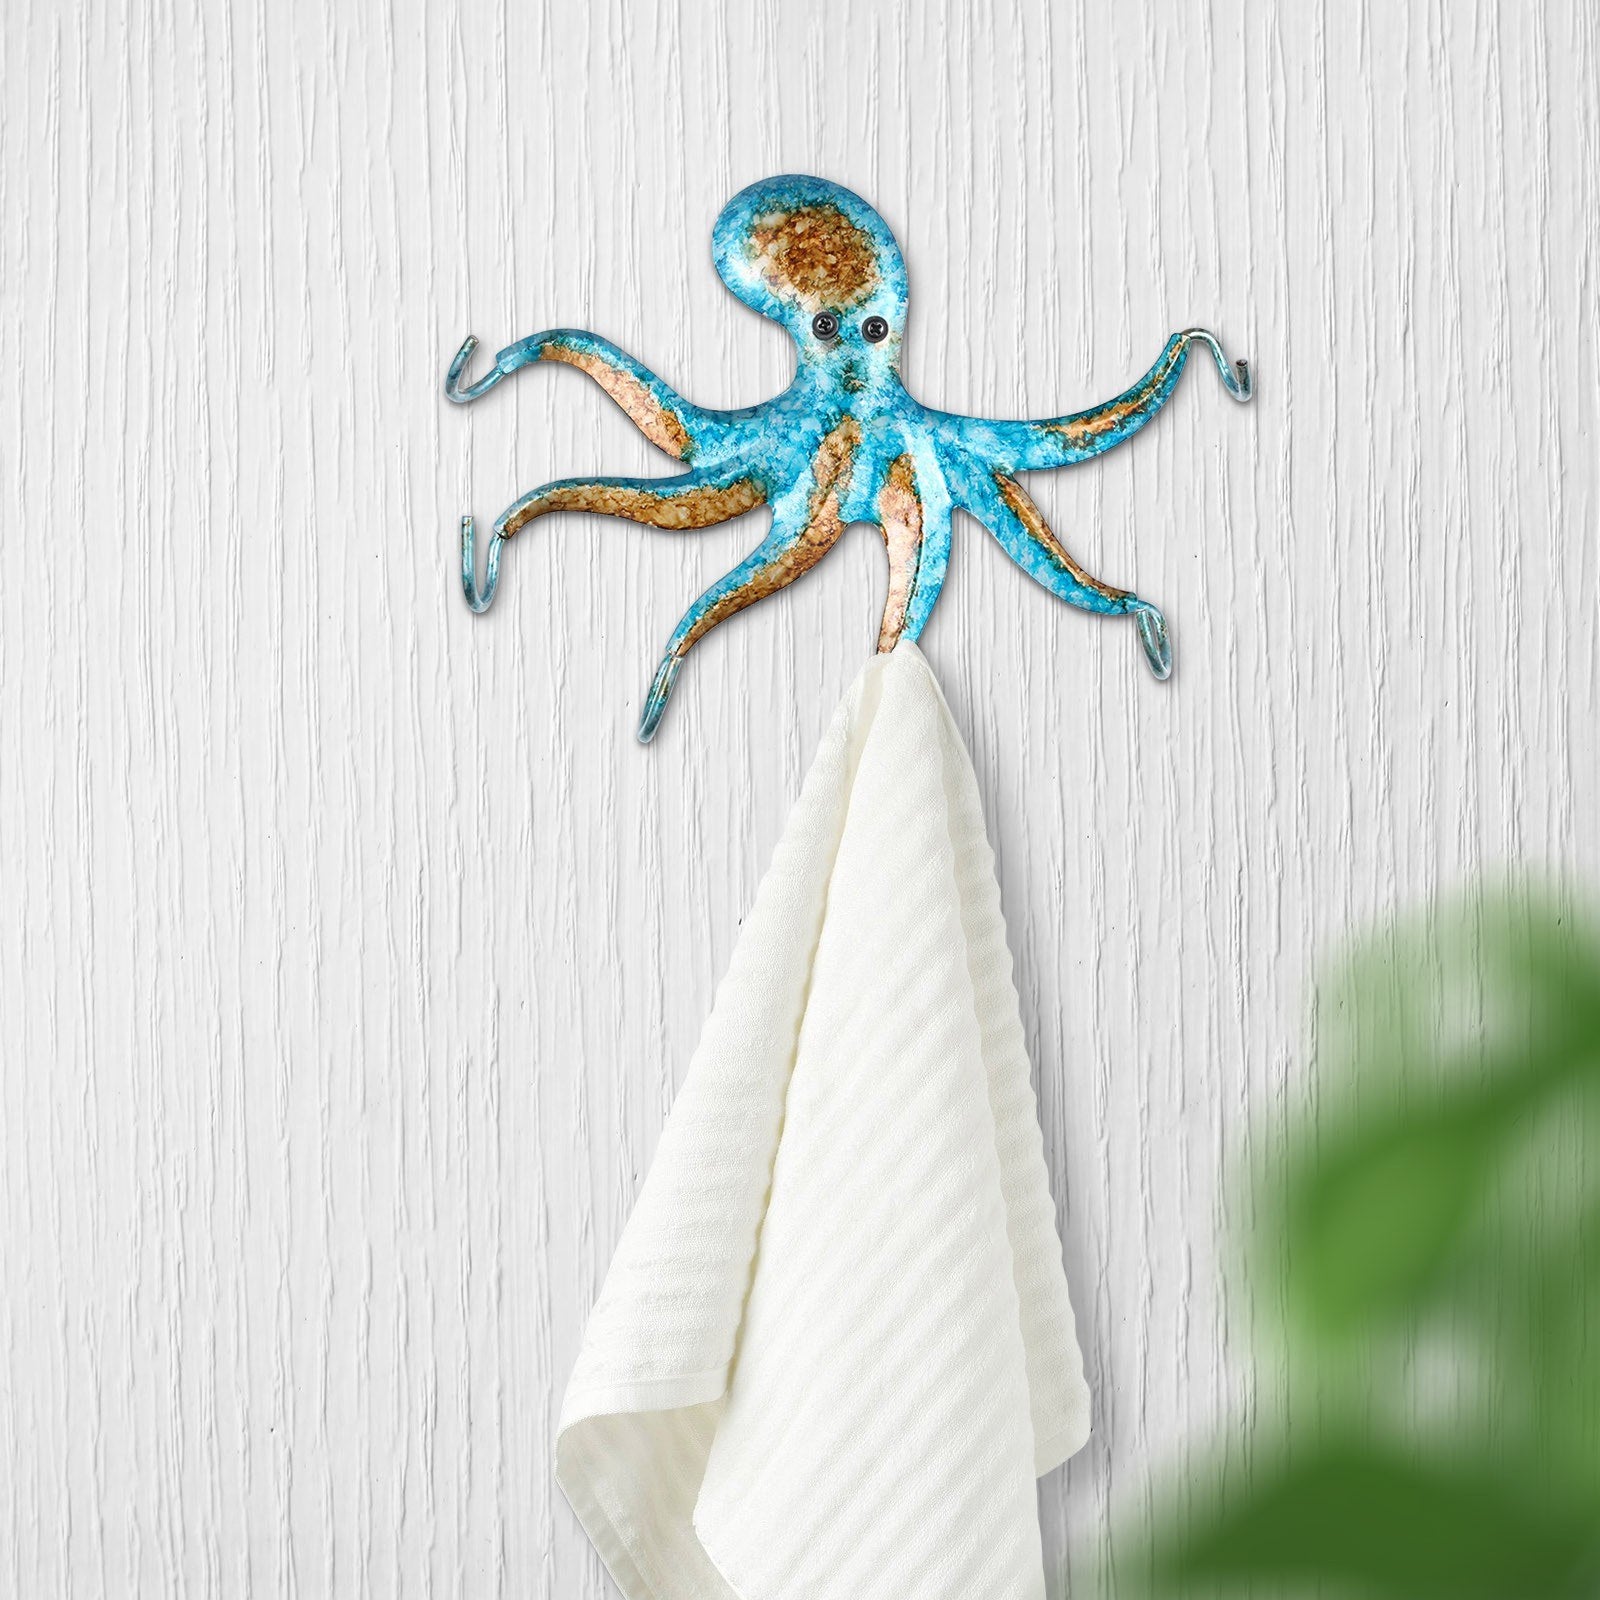 This octopus wall hook is really beautiful & has a wonderful color